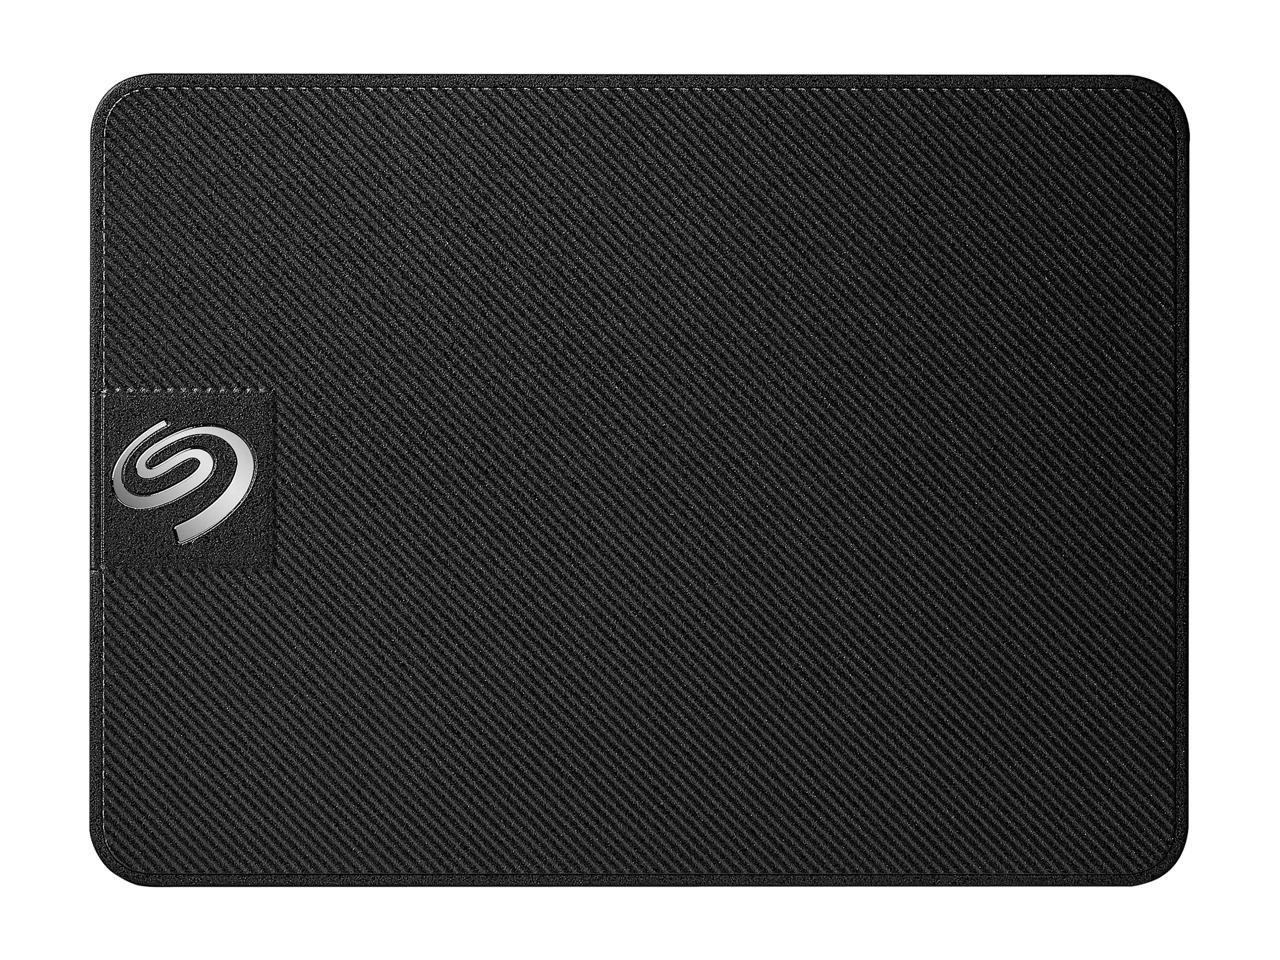 Seagate Expansion SSD 1TB USB 3.0 External / Portable Solid State Drive for PC Laptop and Mac (STJD1000400)